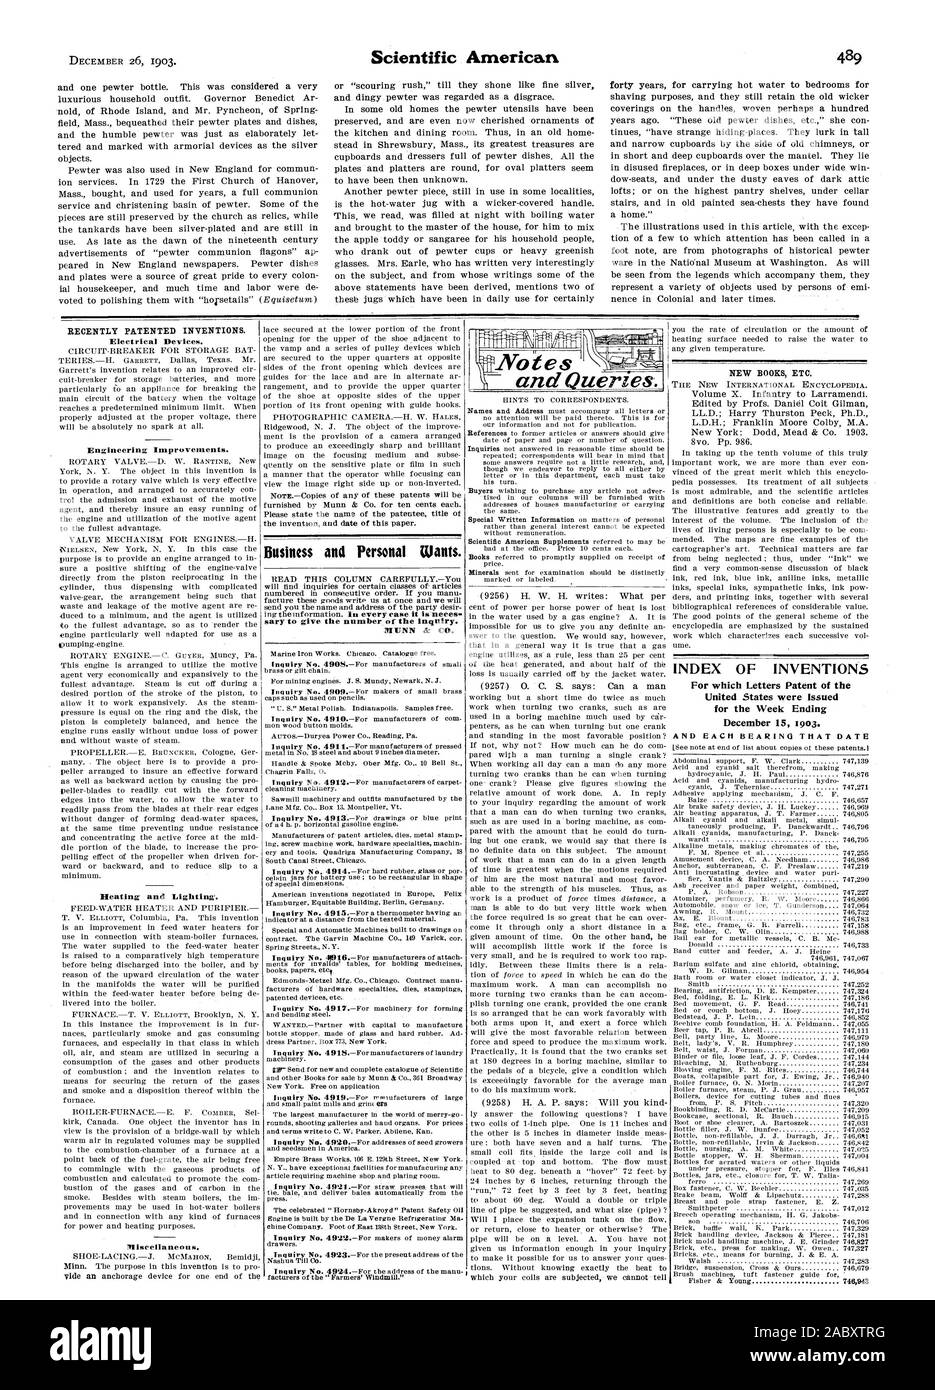 Electrical Devices. Engineering Improvements. Heating and Lighting. Miscellaneous. Business and Personal Wants. INDEX OF INVENTIONS For which Letters Patent of the United States were Issued for the Week Ending December 15 1903. 46 audit r and Queries., scientific american, 1903-12-26 Stock Photo